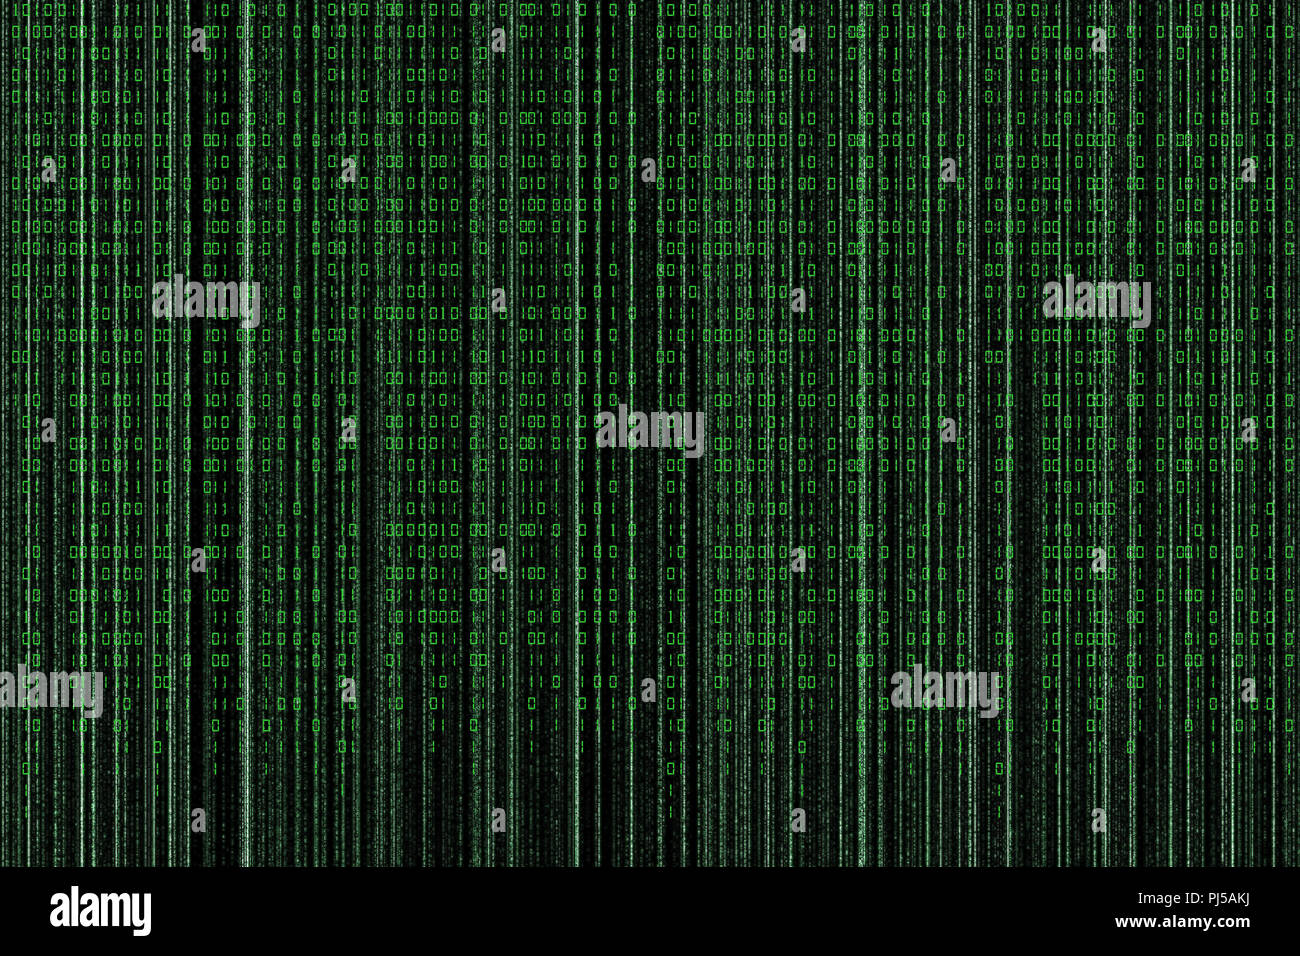 Matrix style background, green falling numbers Stock Photo